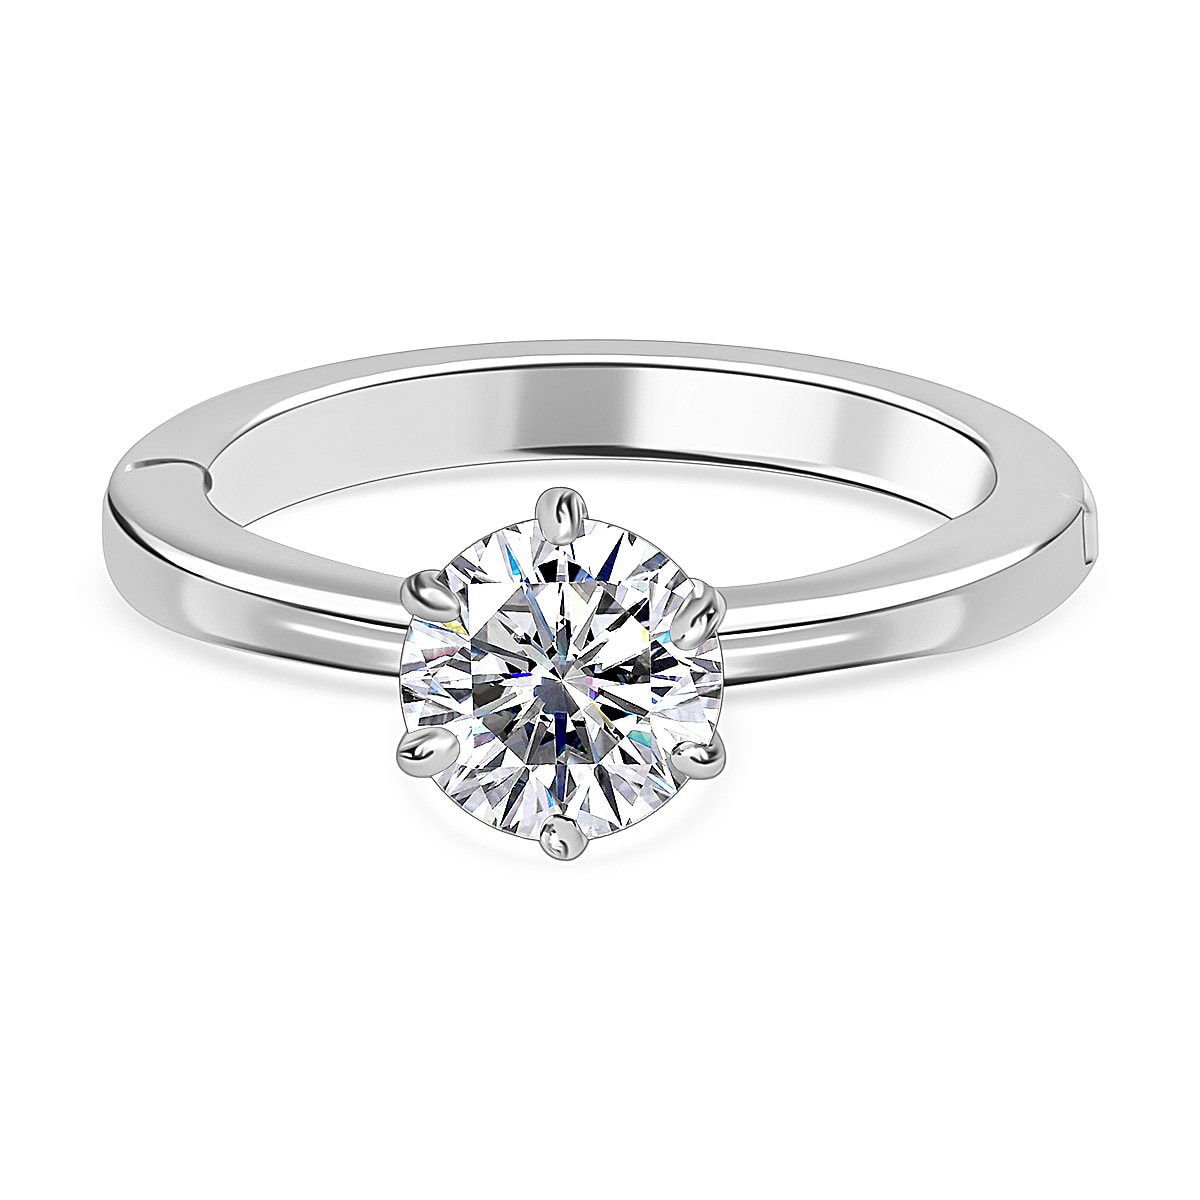 First Time Ever OPENABLE  Moissanite Solitaire Ring in Platinum Overlay Sterling Silver